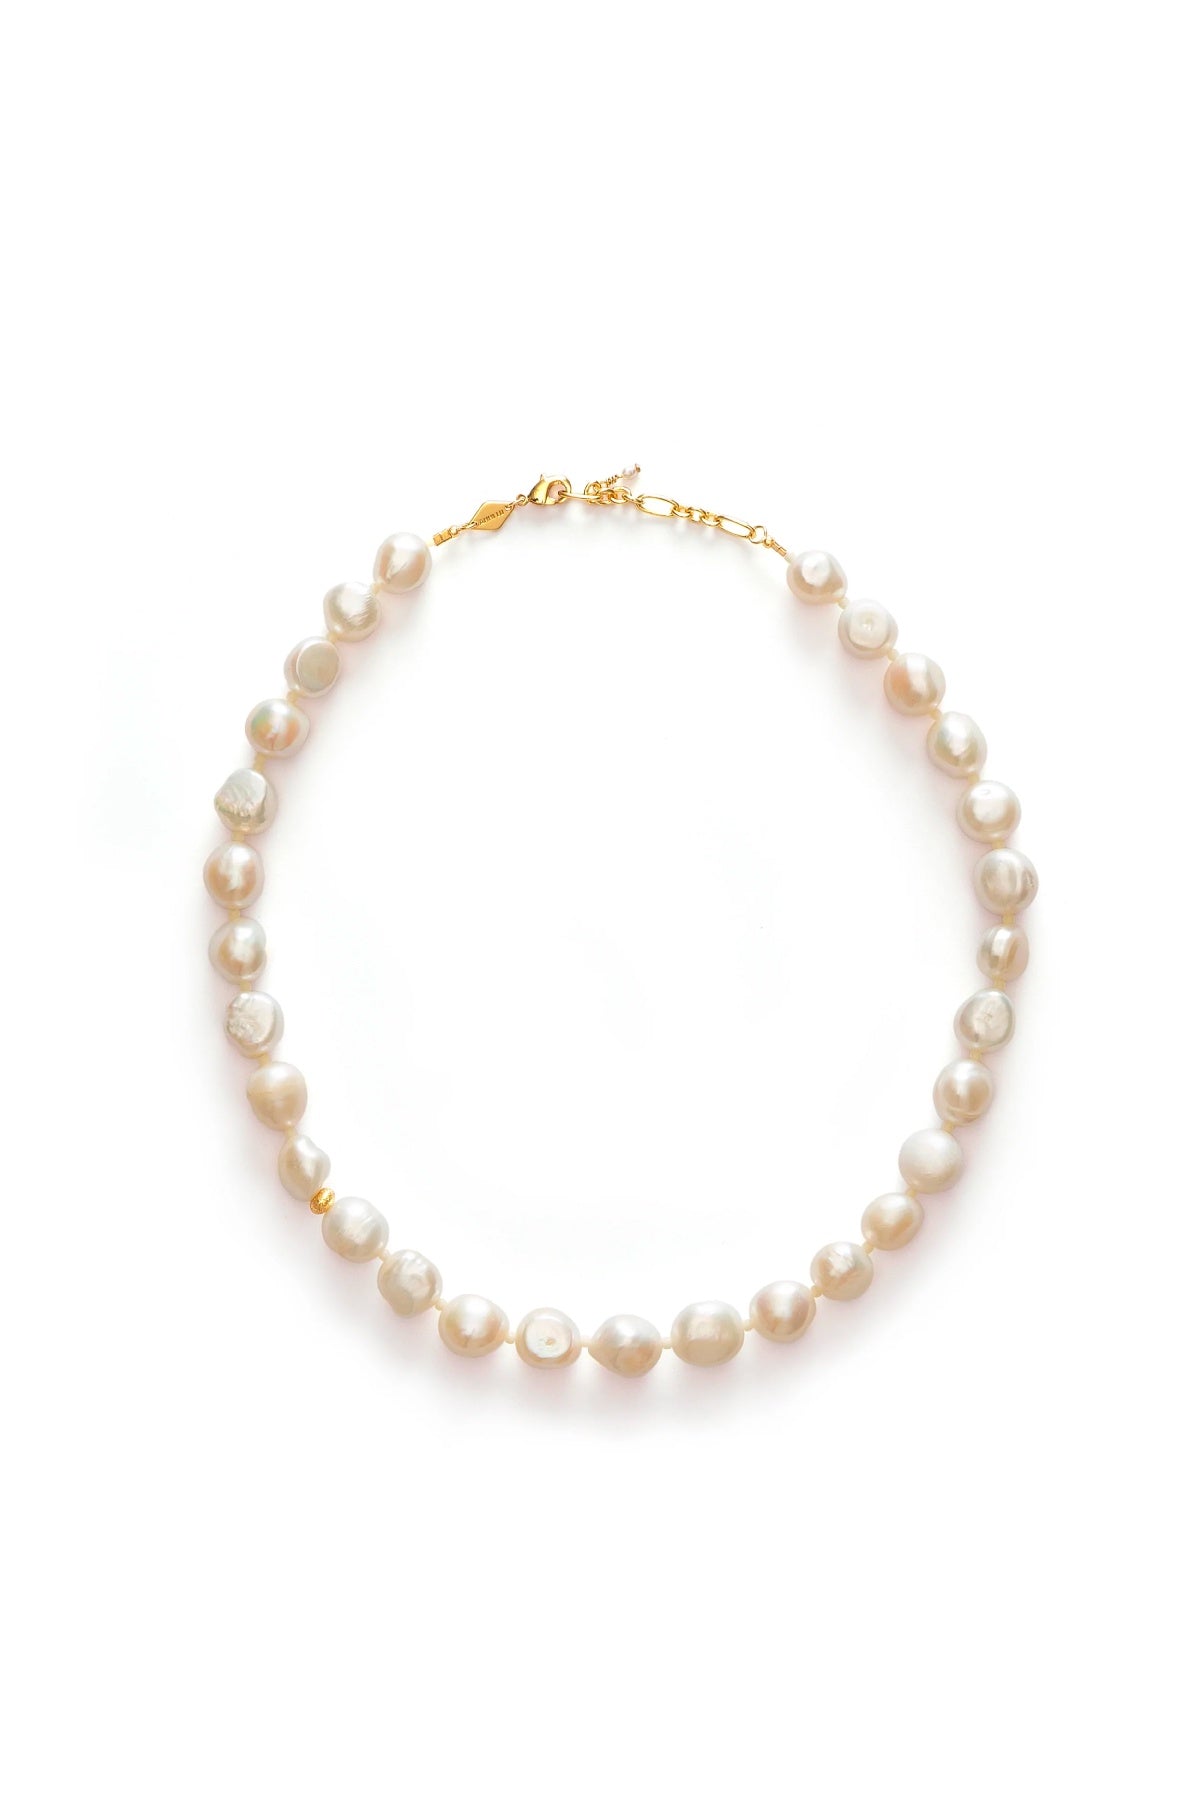 Anni Lu Stellar Pearly Necklace - Gold